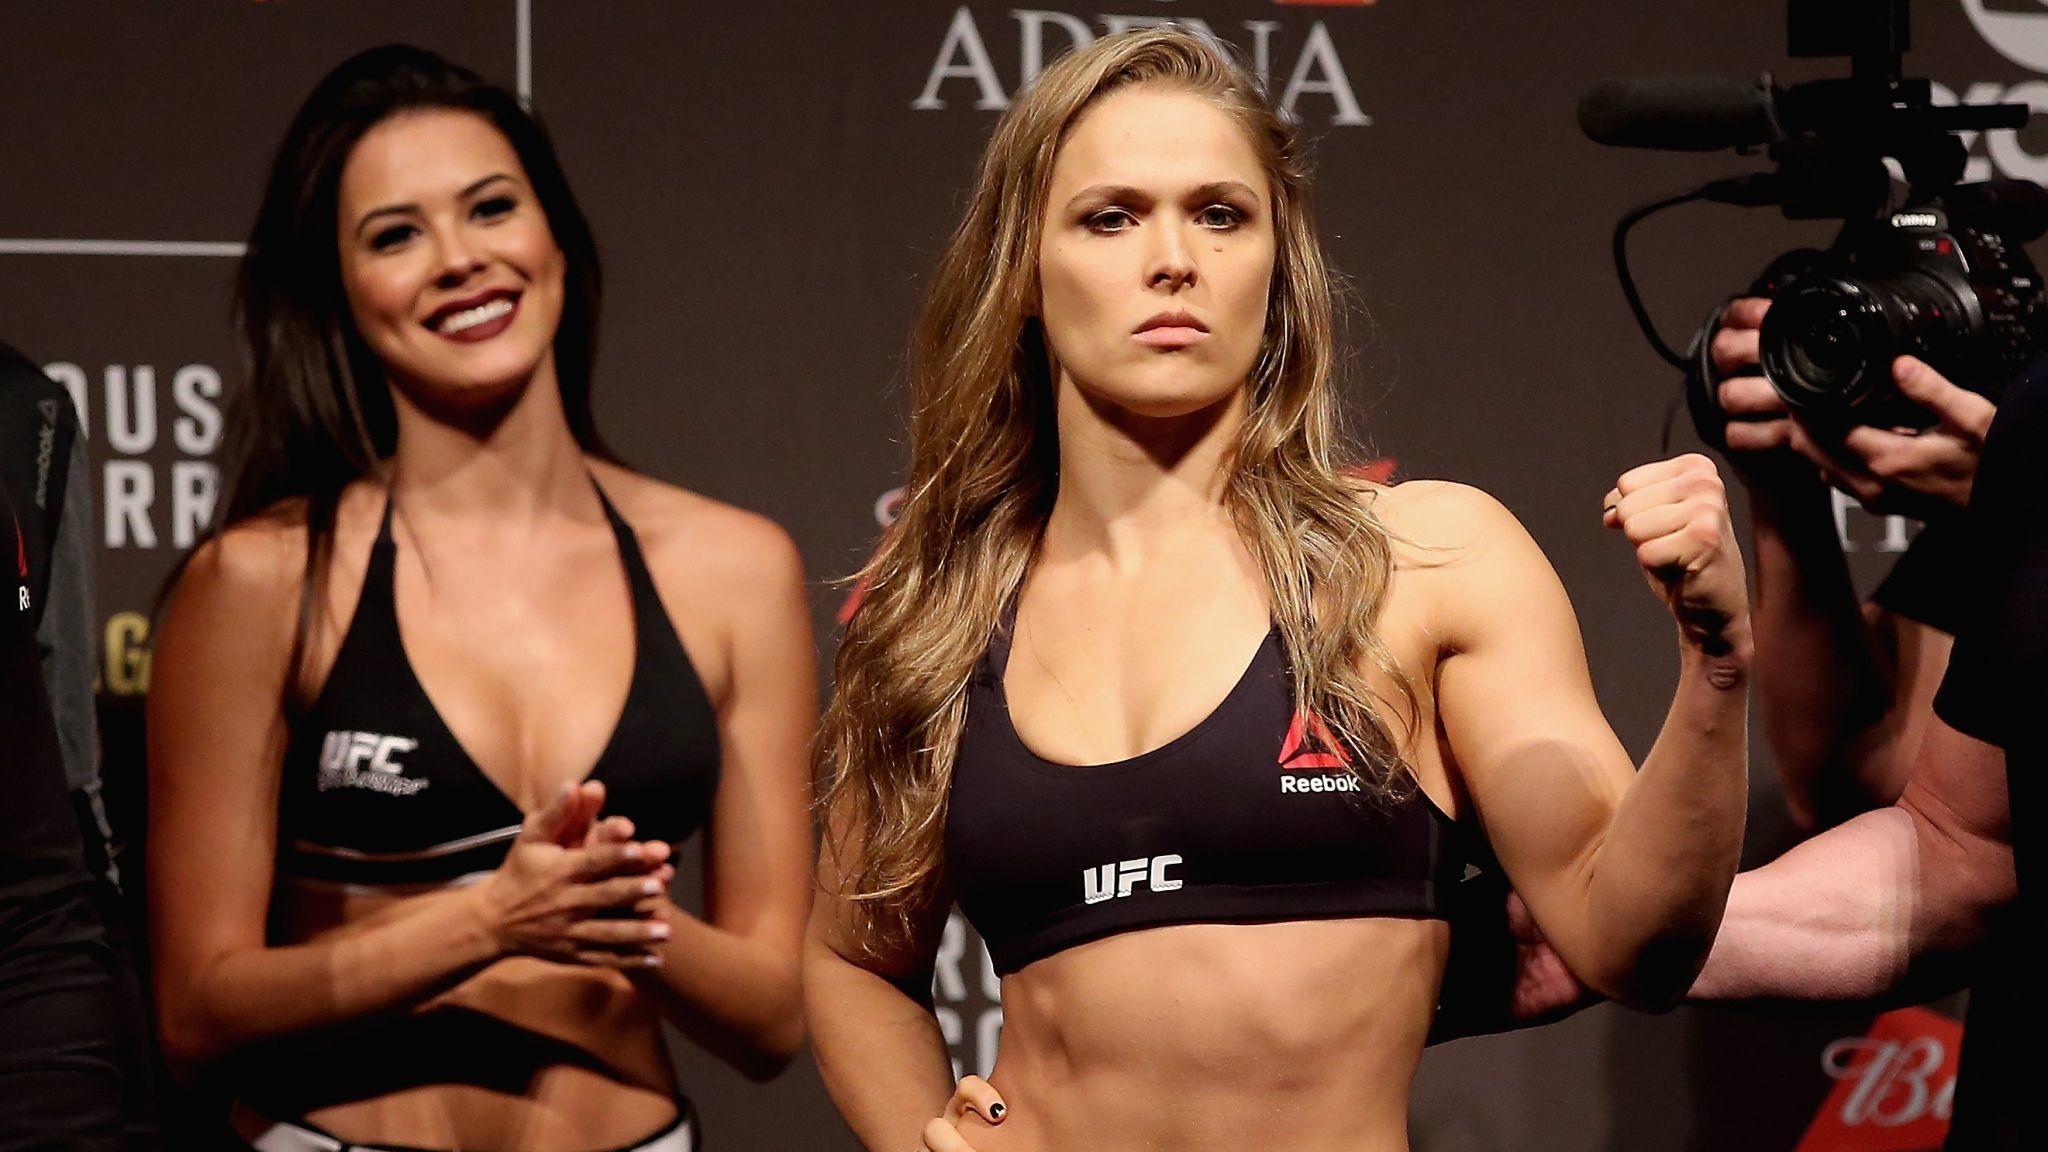  Ronda Rousey unstoppable force in women's MMA